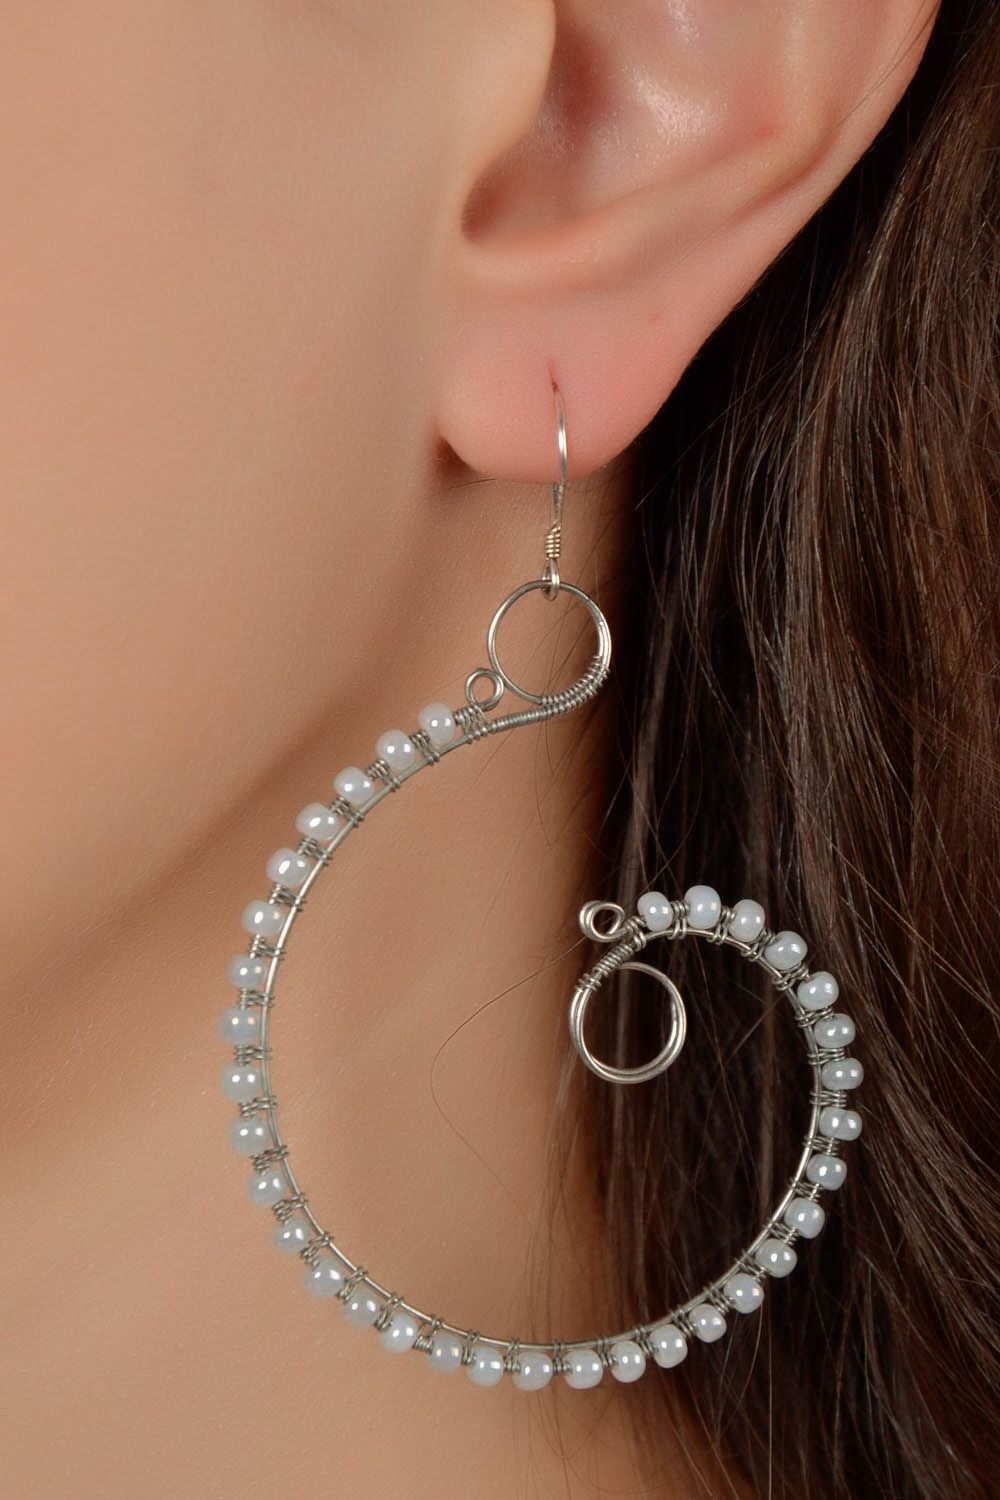 Earrings with natural stones photo 5